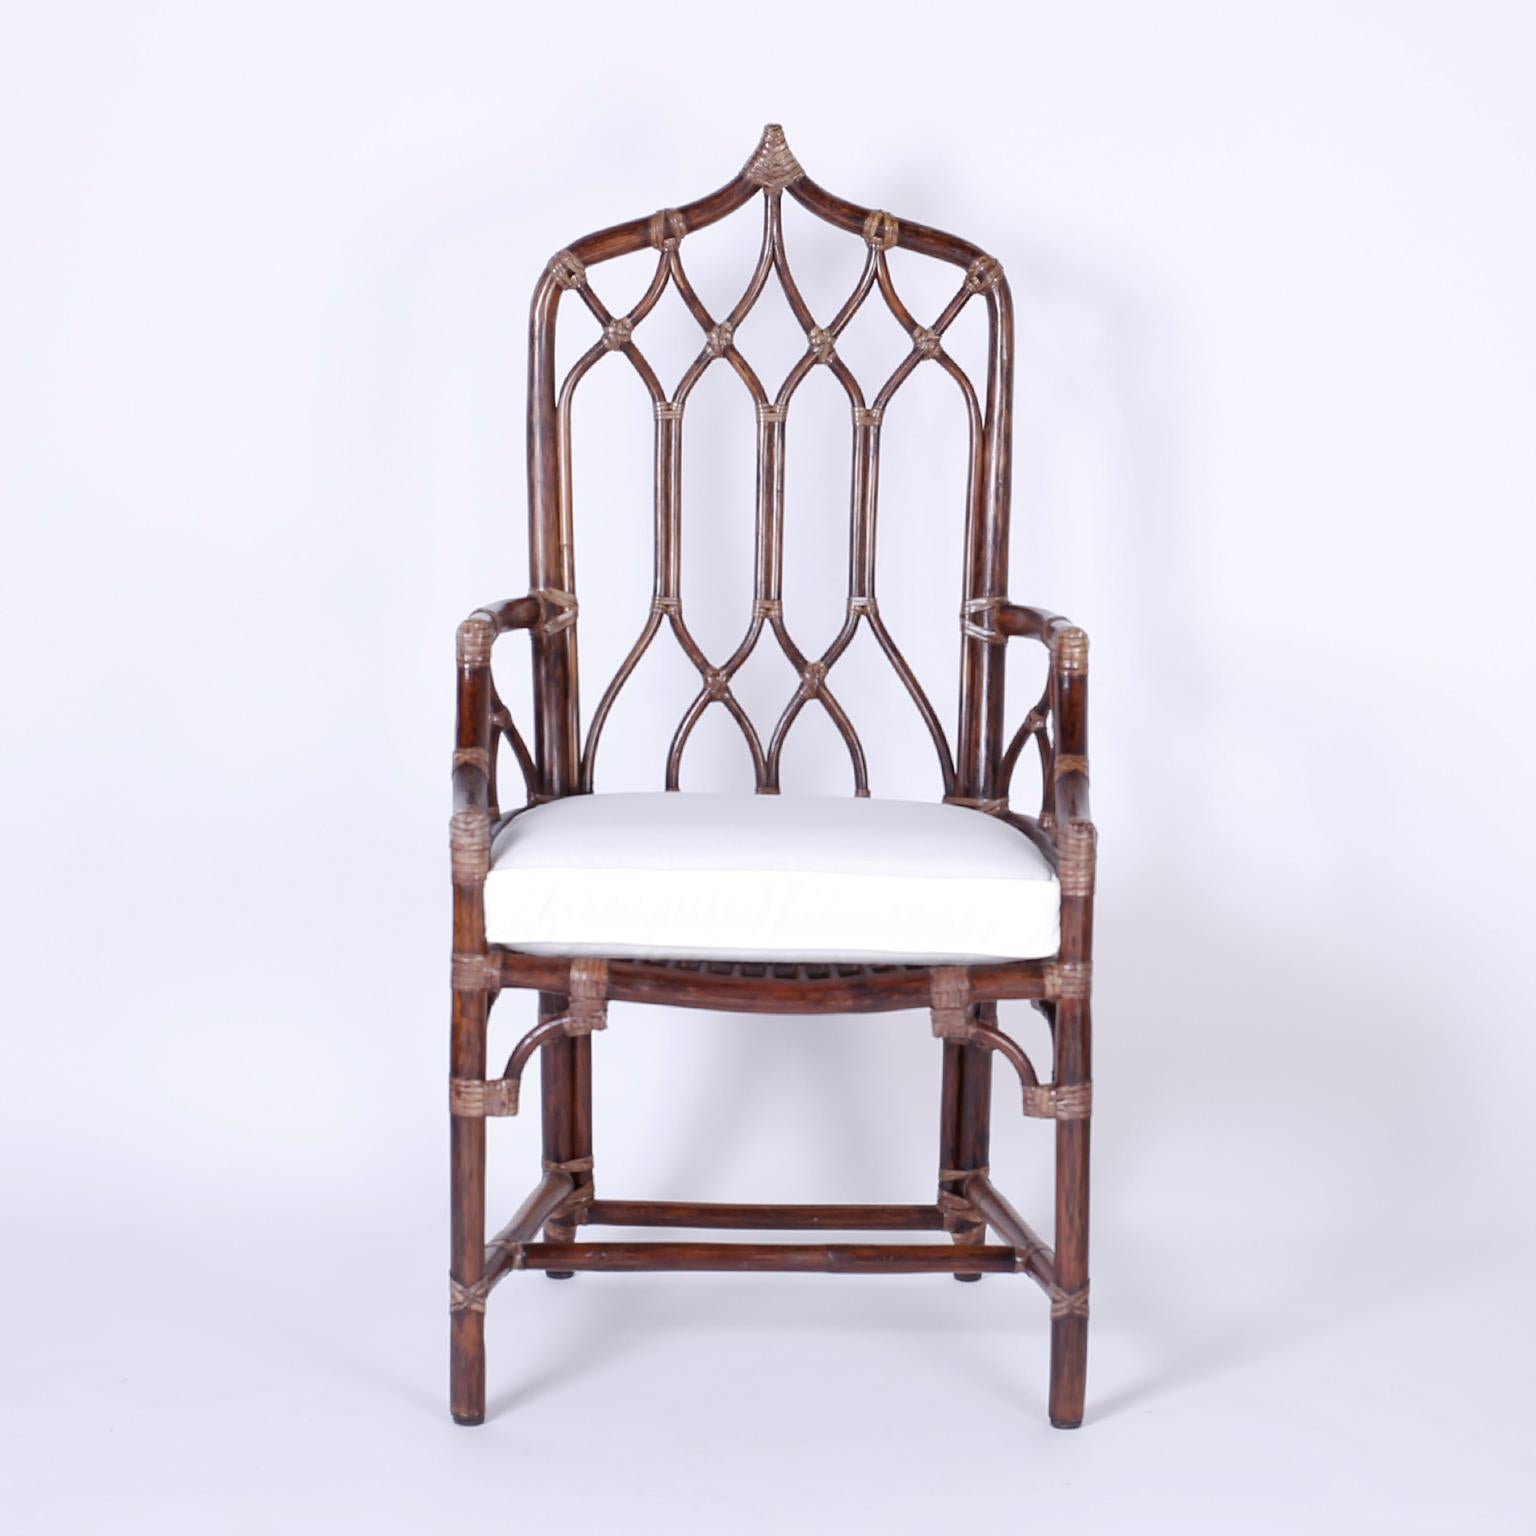 Rare set of ten dining chairs with an exotic cathedral or gothic form, graceful bentwood lines wrapped with reed at the joints, and custom cushions. Casually elegant, sturdy, comfortable, and signed McGuire on a brass plaque. 

Measures: